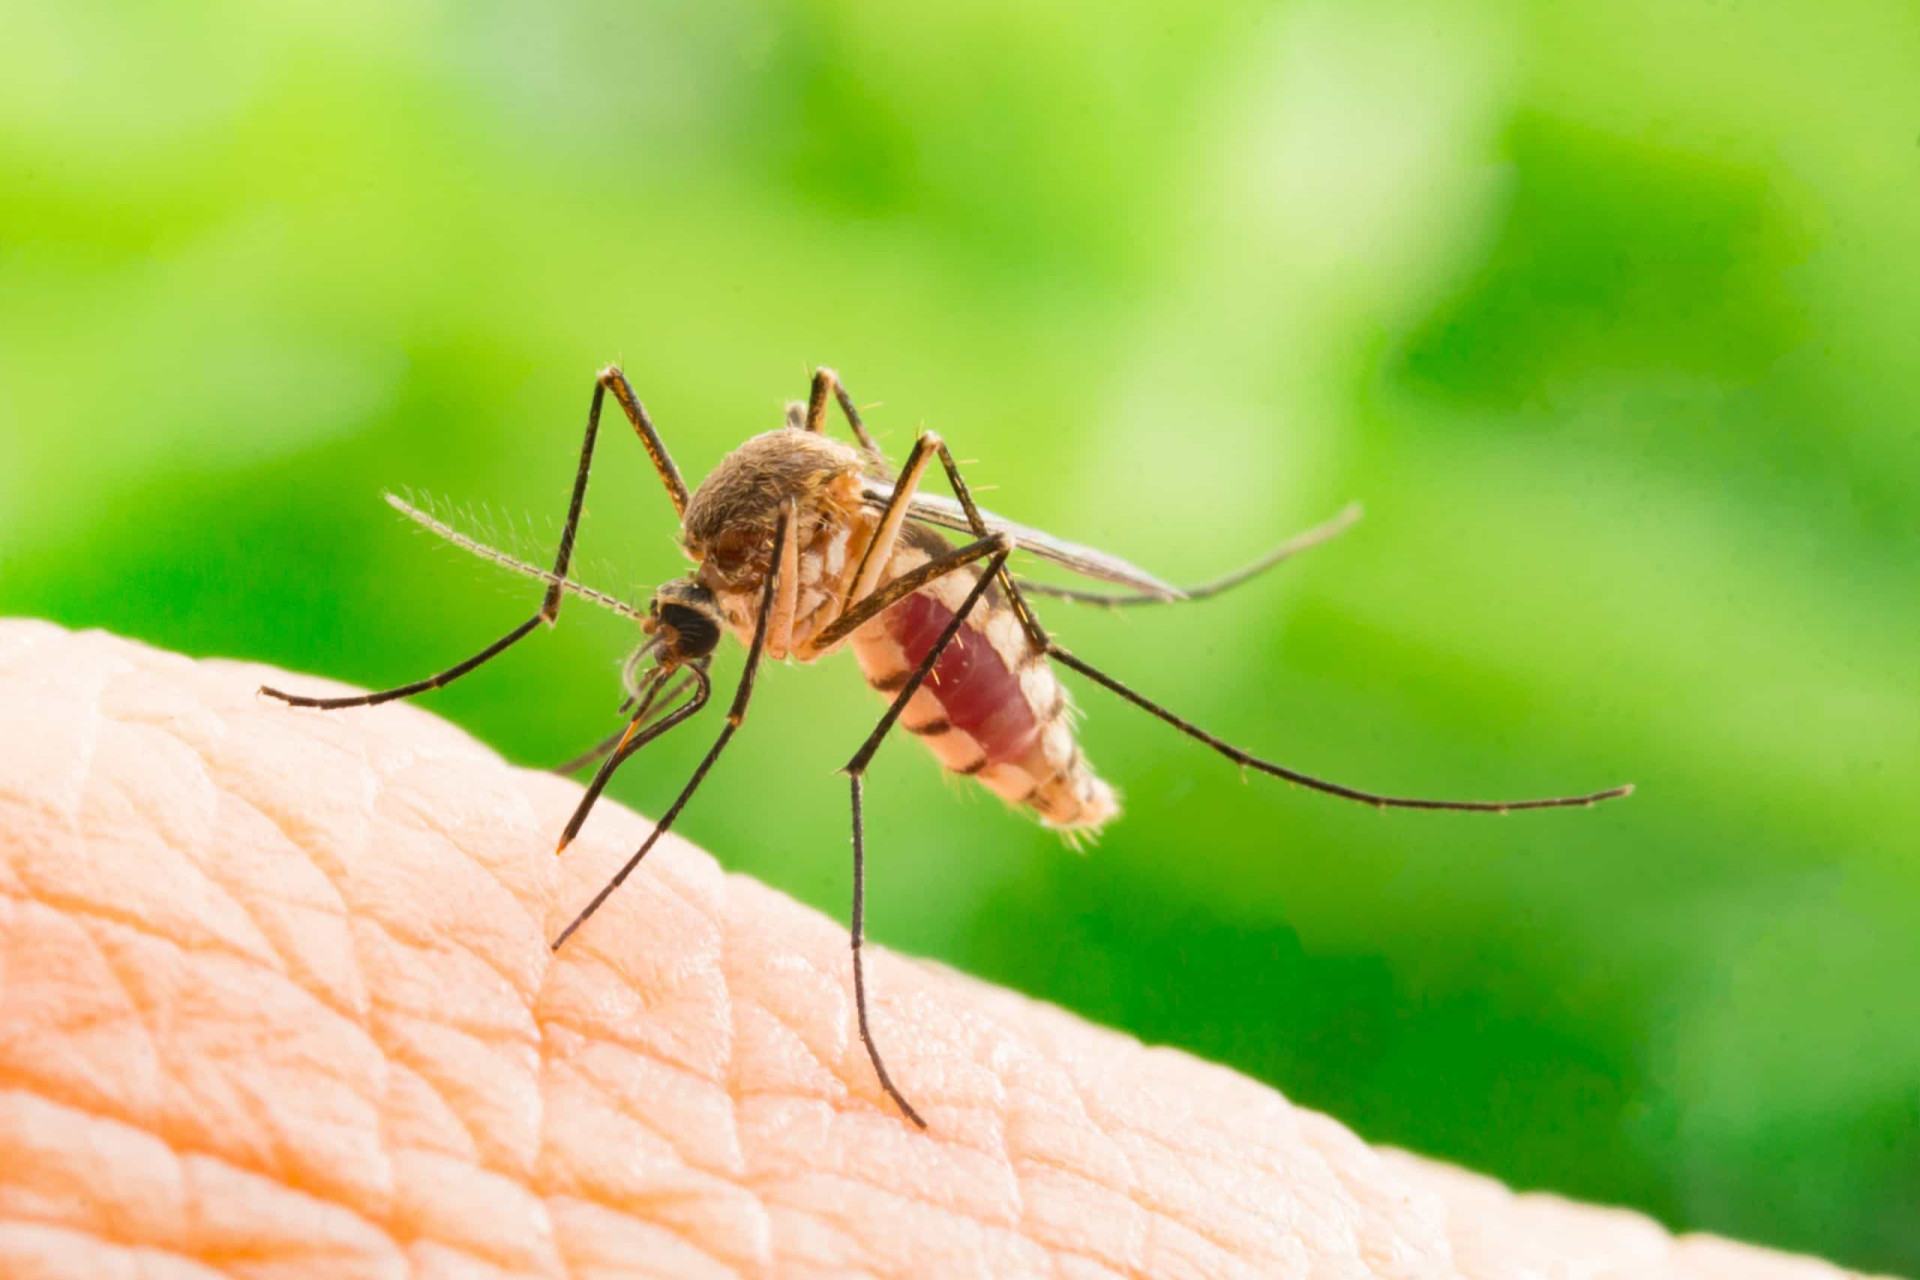 Mosquitoes like to <a href="https://uk.starsinsider.com/health/389185/why-mosquitoes-love-to-bite-you-explained">bite</a> human feet, so maybe <a href="https://www.thelancet.com/journals/lancet/article/PIIS0140-6736(05)65812-6/fulltext">cheese</a> with a similar odor to our feet would make a good trap?<p>You may also like:<a href="https://www.starsinsider.com/n/439901?utm_source=msn.com&utm_medium=display&utm_campaign=referral_description&utm_content=410835v1en-au"> 30 things only divorced people know</a></p>